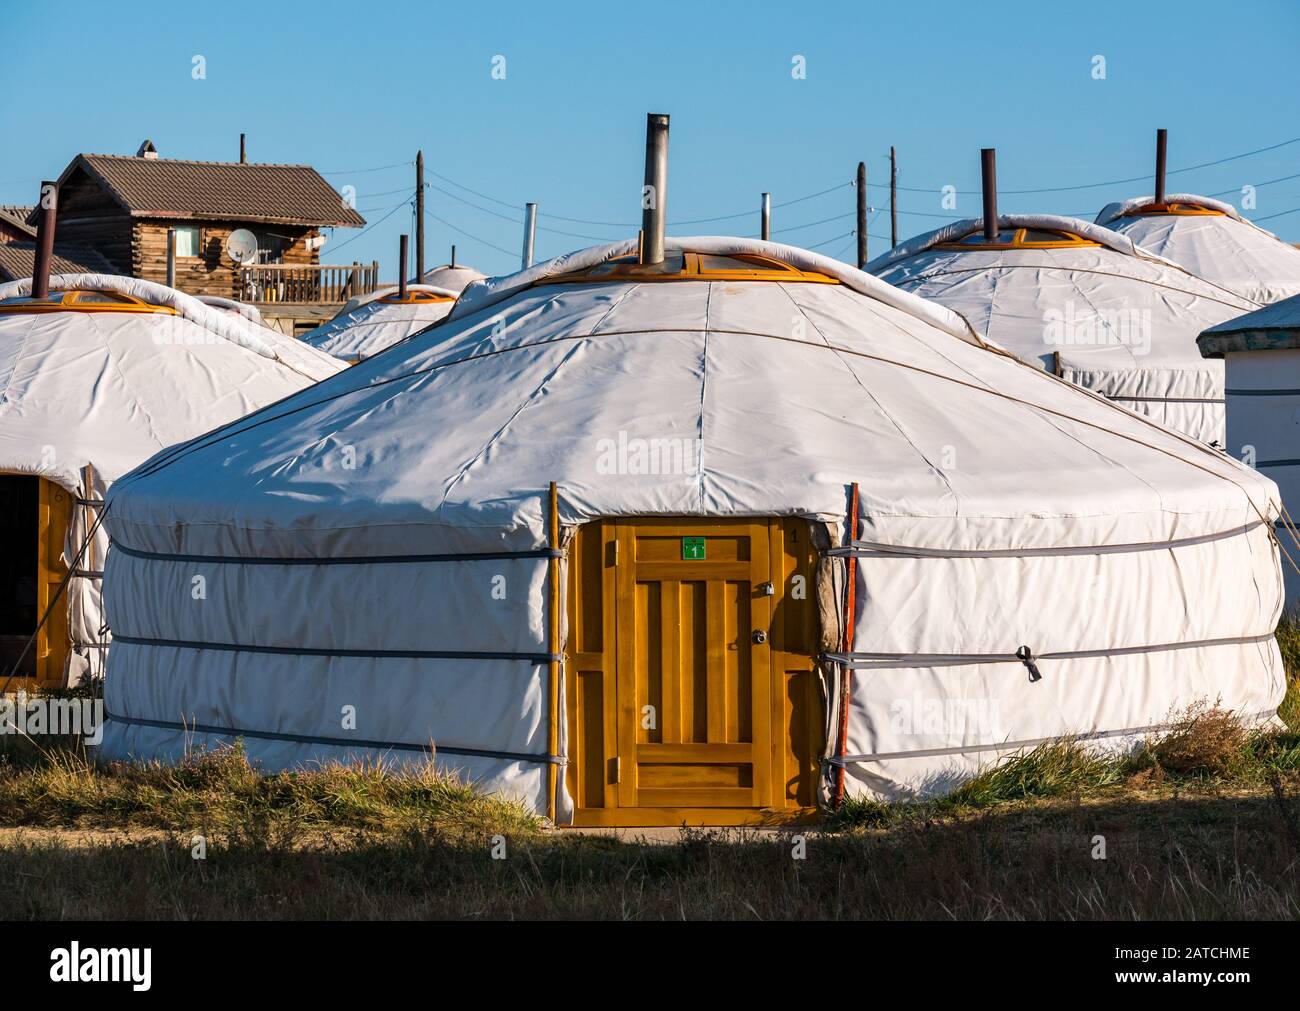 Yurts at Mongolian Khustaii ger camp with traditional yurts, Hustai or Khustain Nuruu National Park, Tov Province, Mongolia, Asia Stock Photo